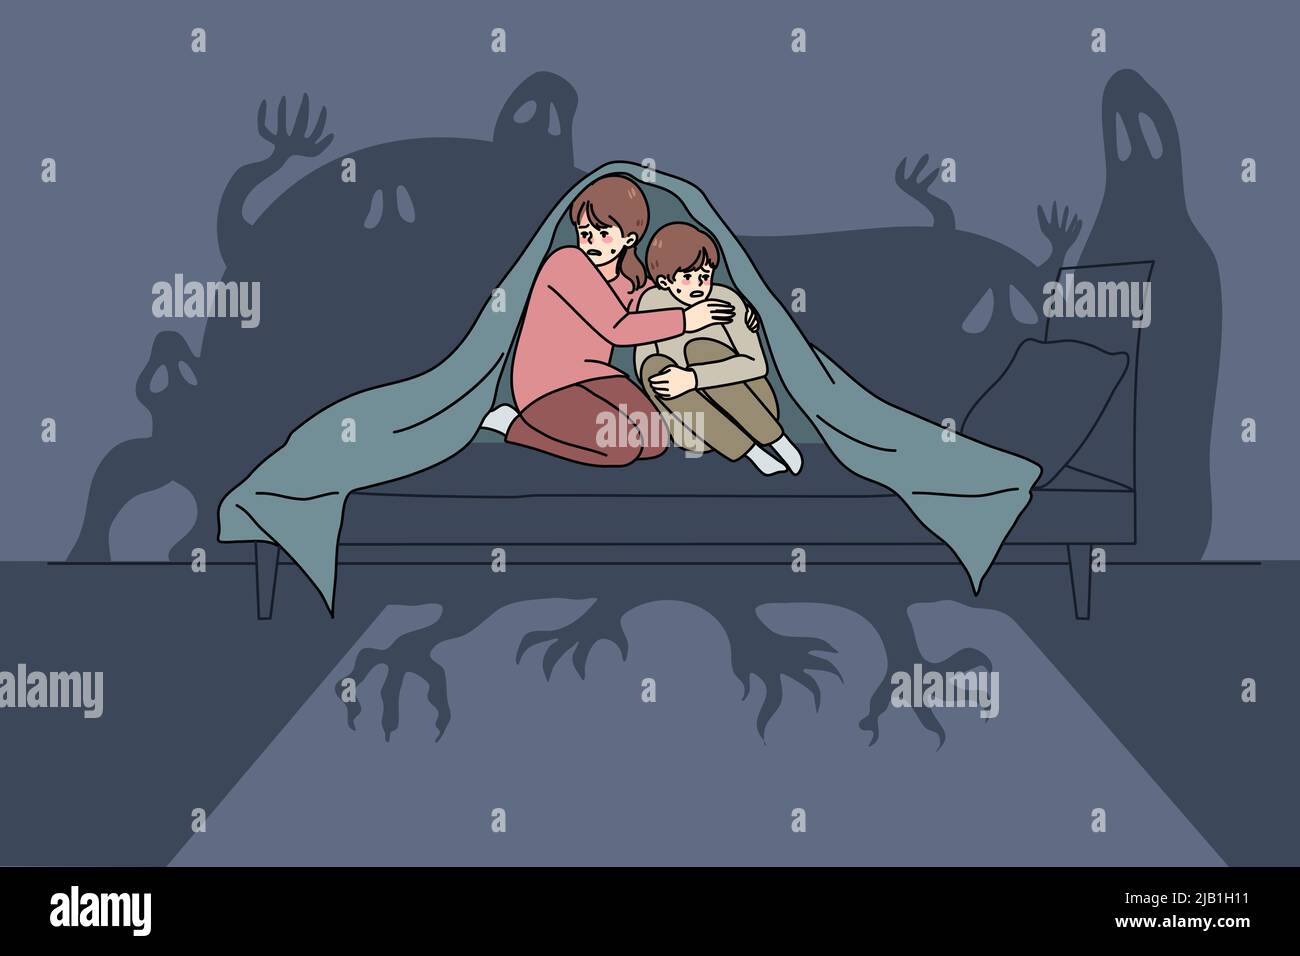 Scared small children sit on bed under blanket terrified by imaginary monsters. Frightened little kids feel fear and anxiety because of house ghosts. Childhood nightmare. Vector illustration.  Stock Vector